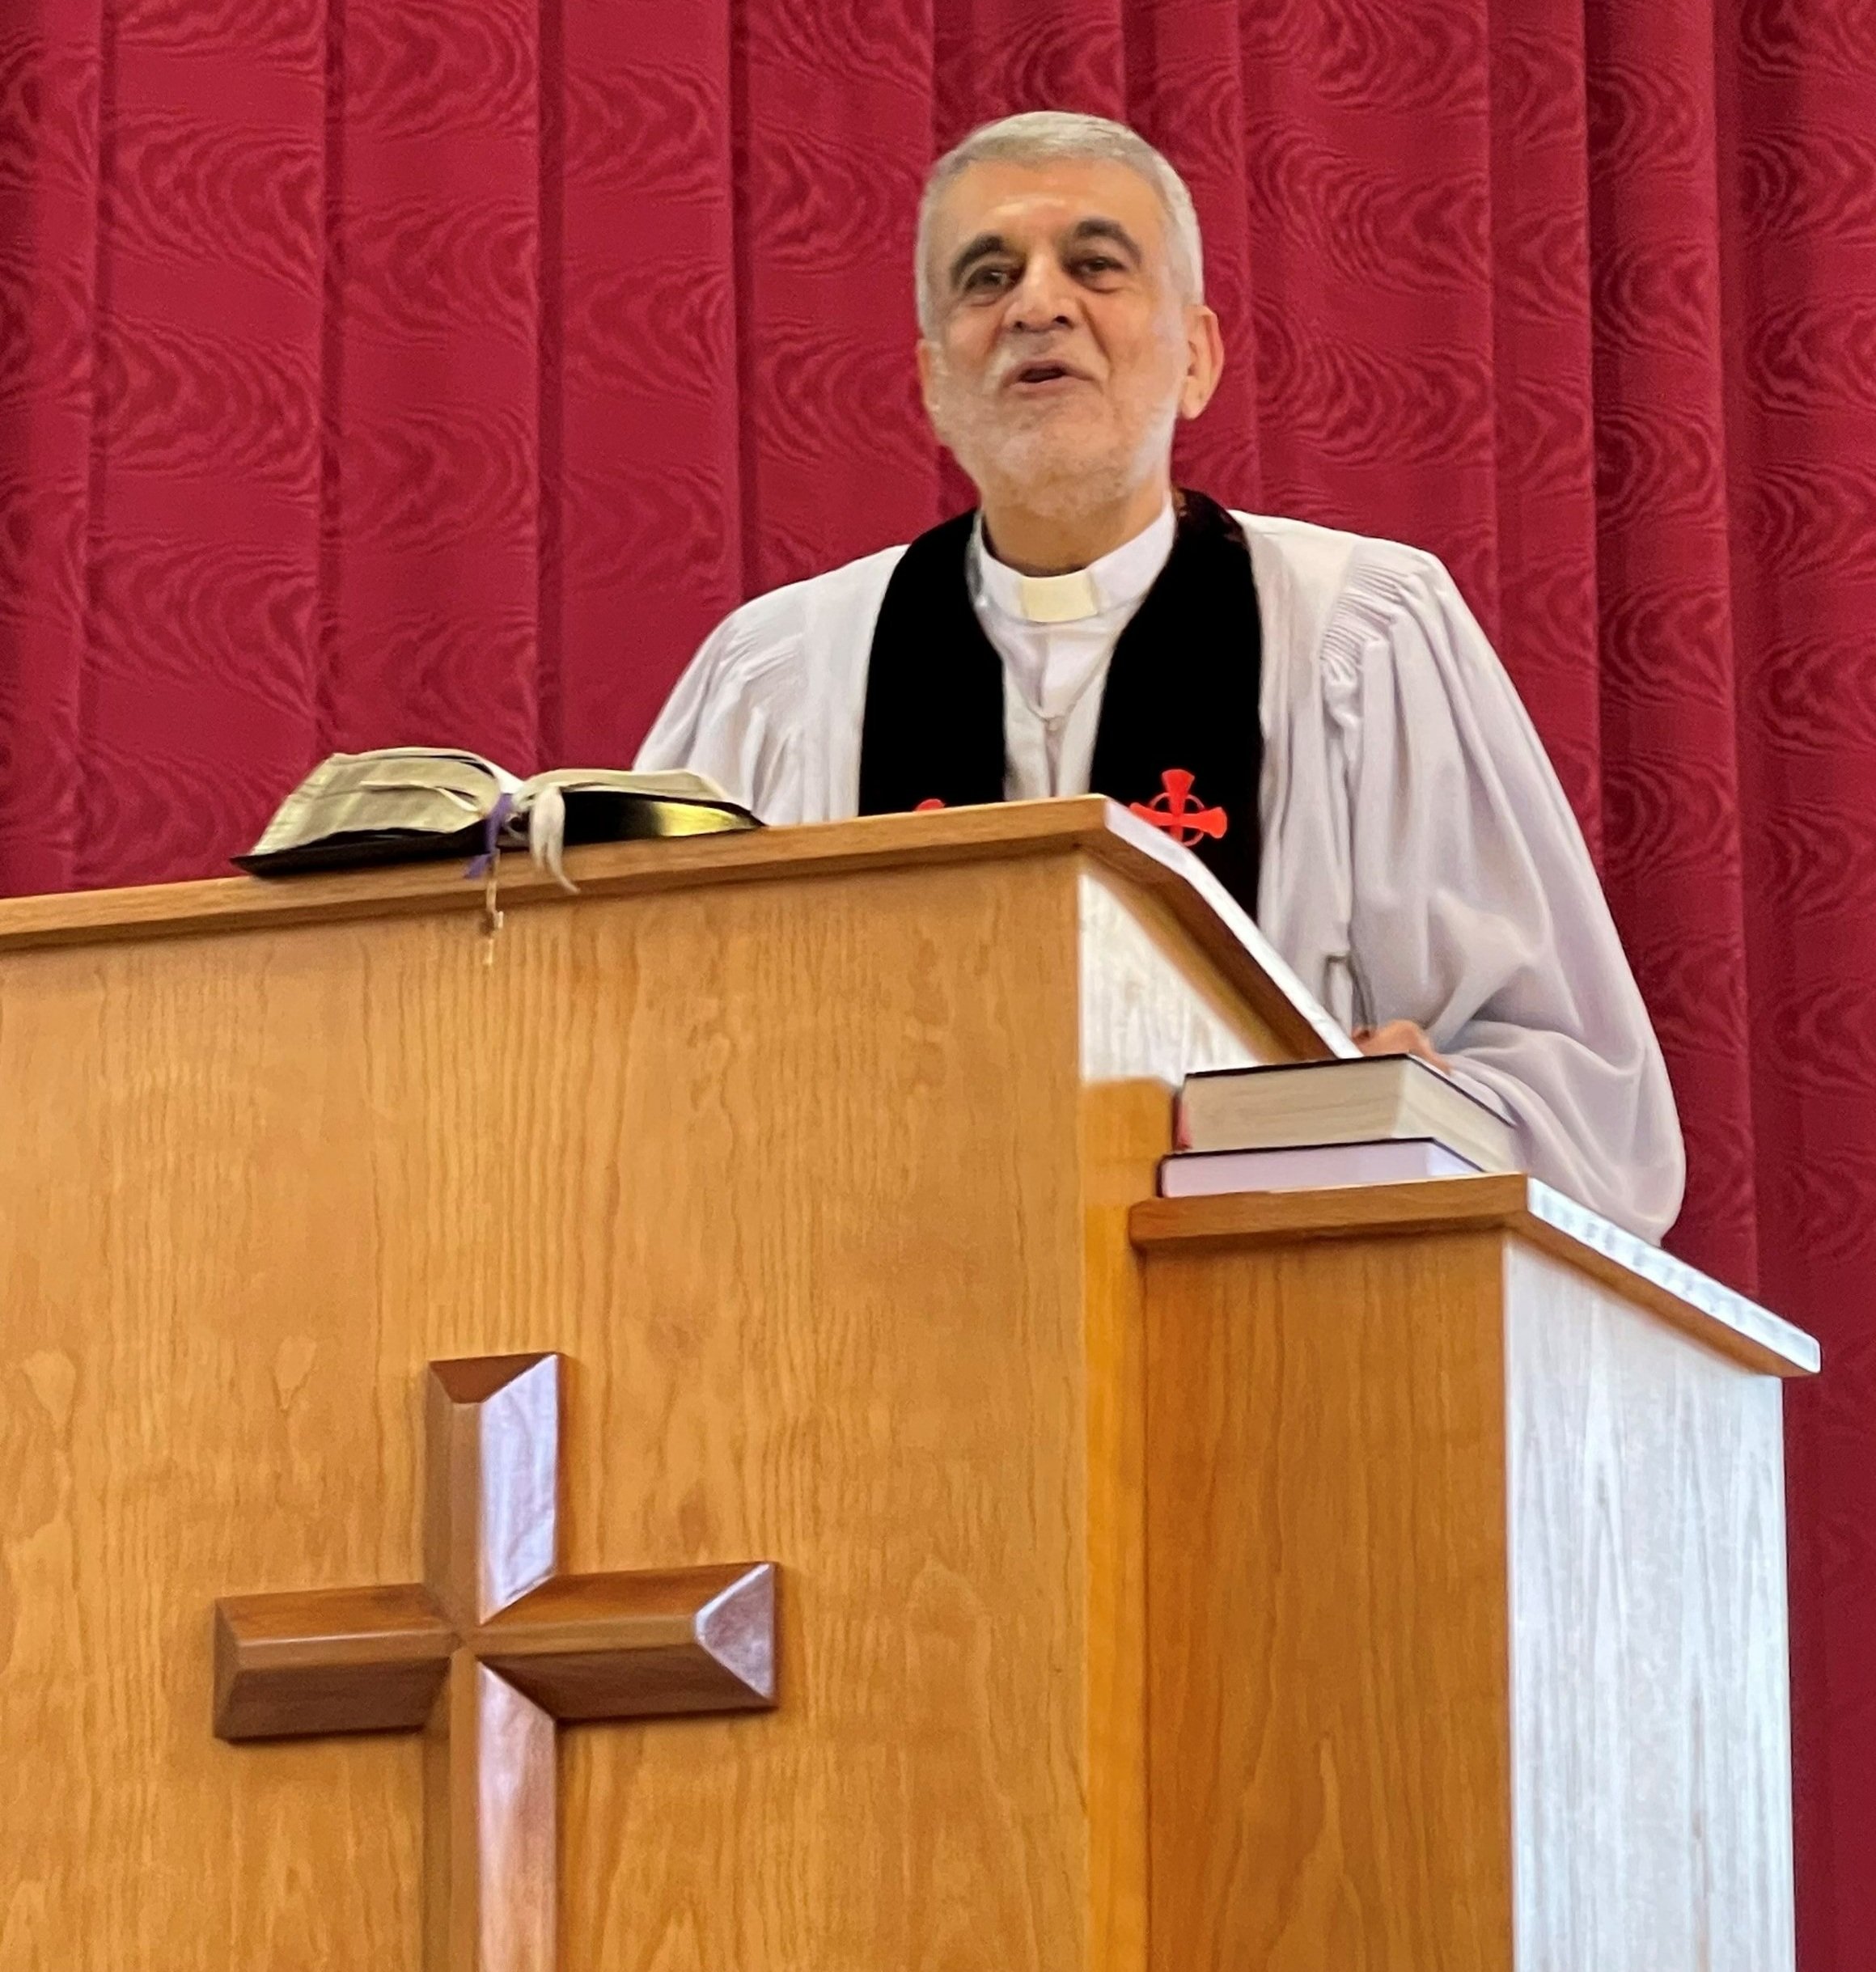   Rev. George Mourad brought a beautiful message about the Lord’s Prayer  